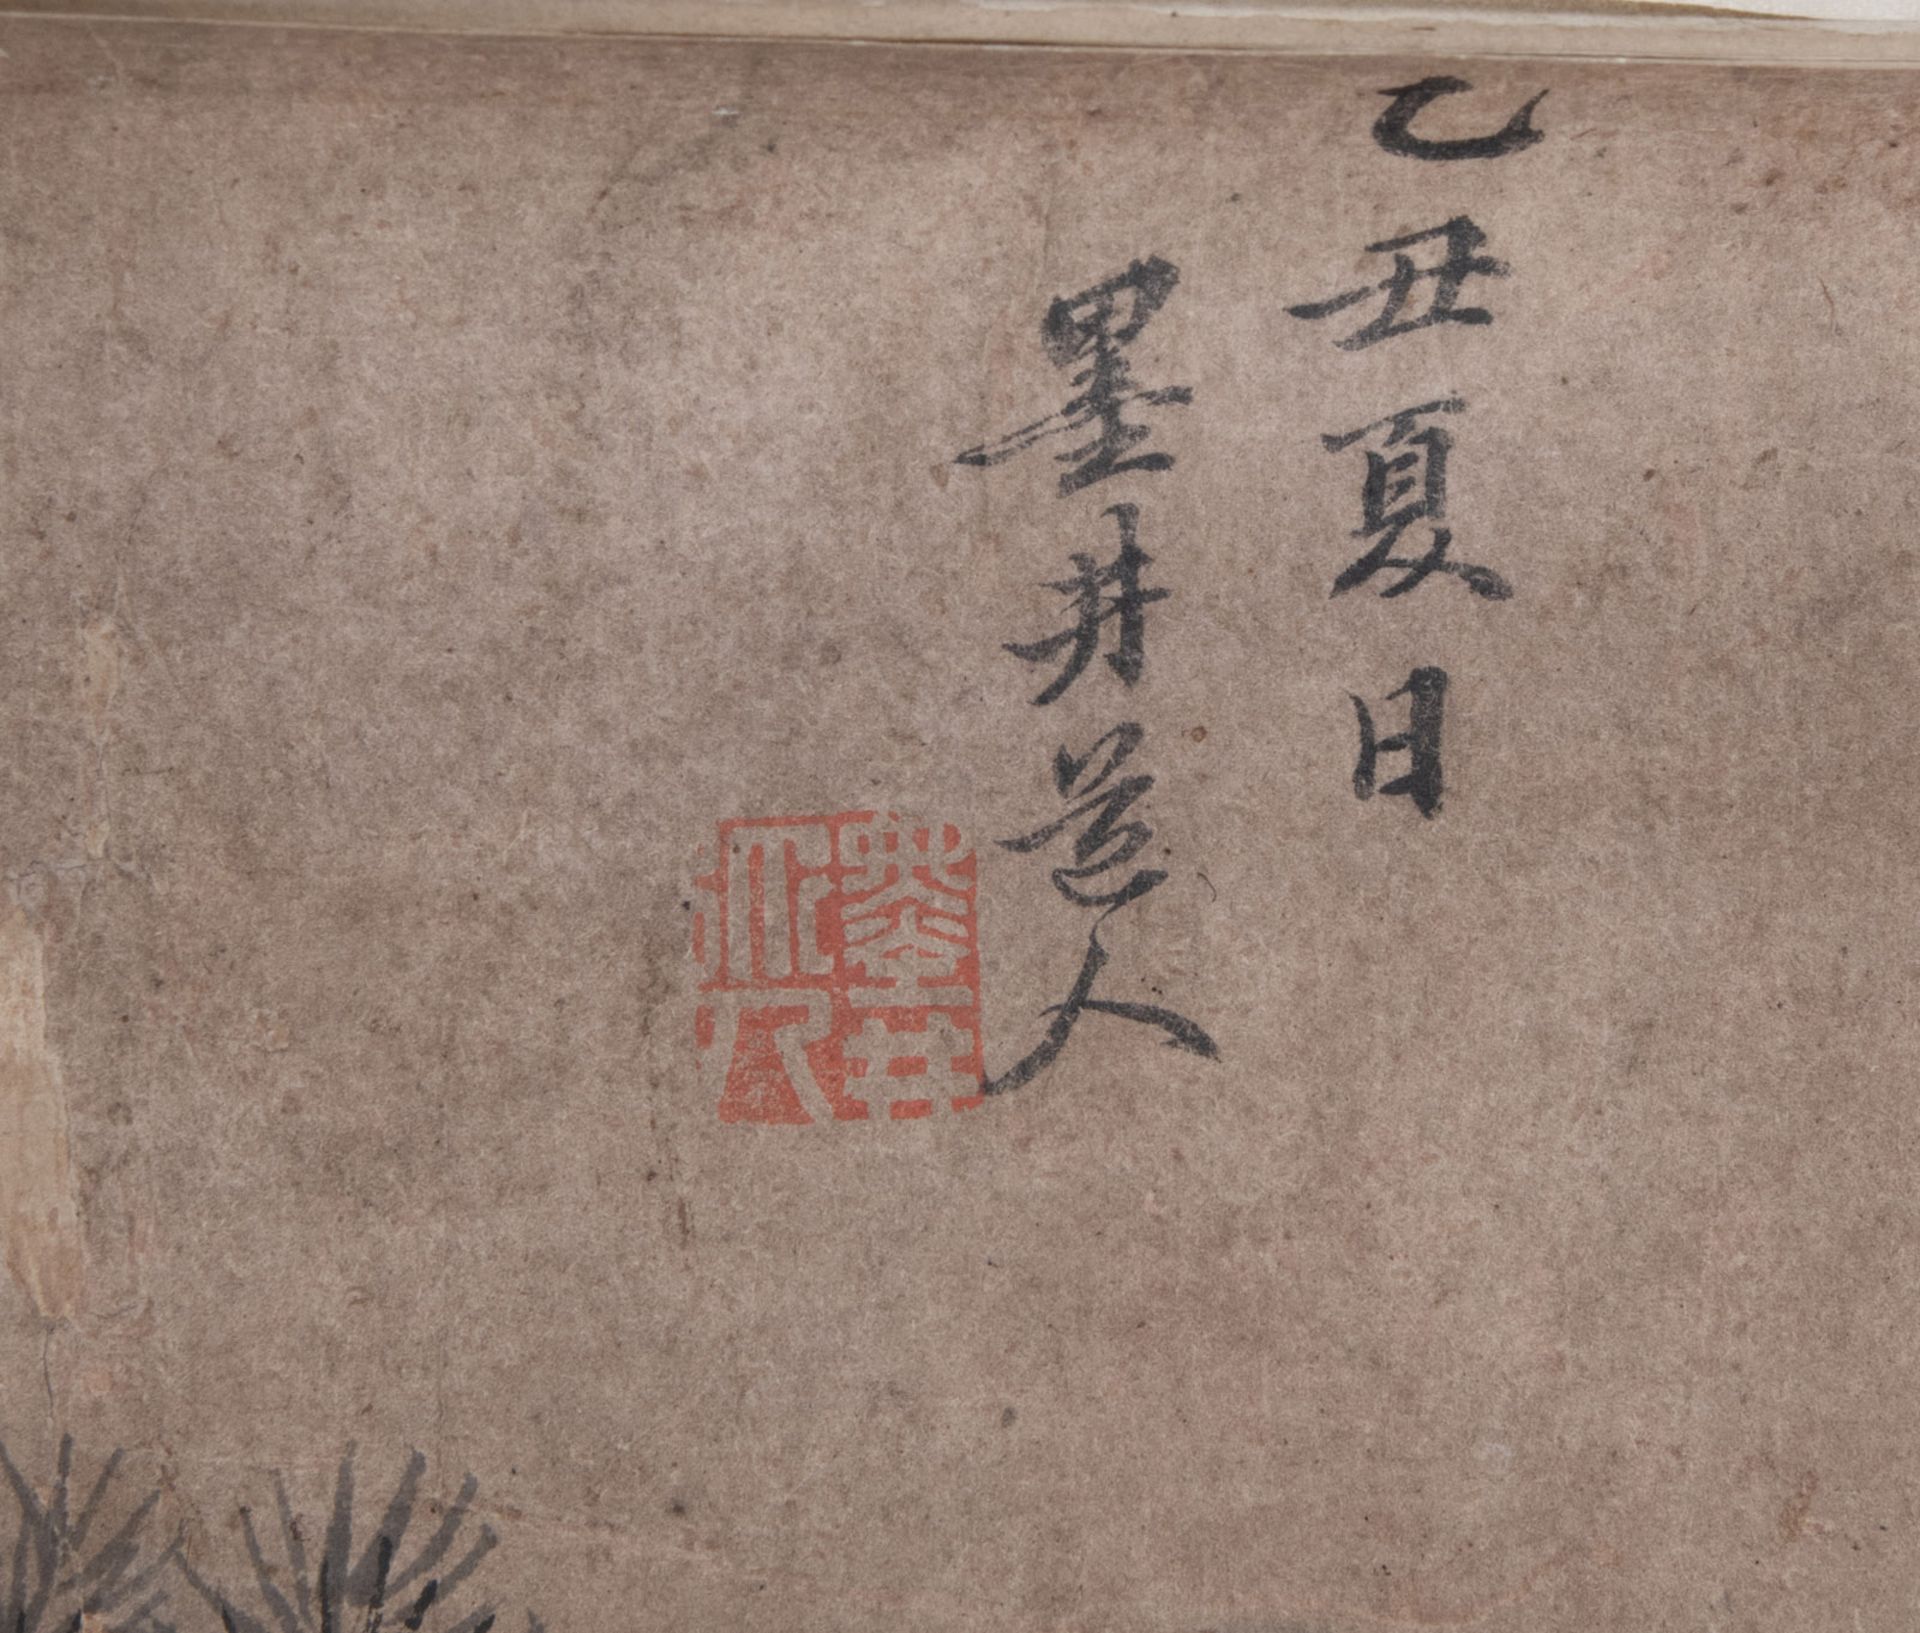 A GROUP OF HANGING SCROLLS DEPICTING MOUNTAIN LANDSCAPES AND A CALLIGRAPHY - Image 10 of 11